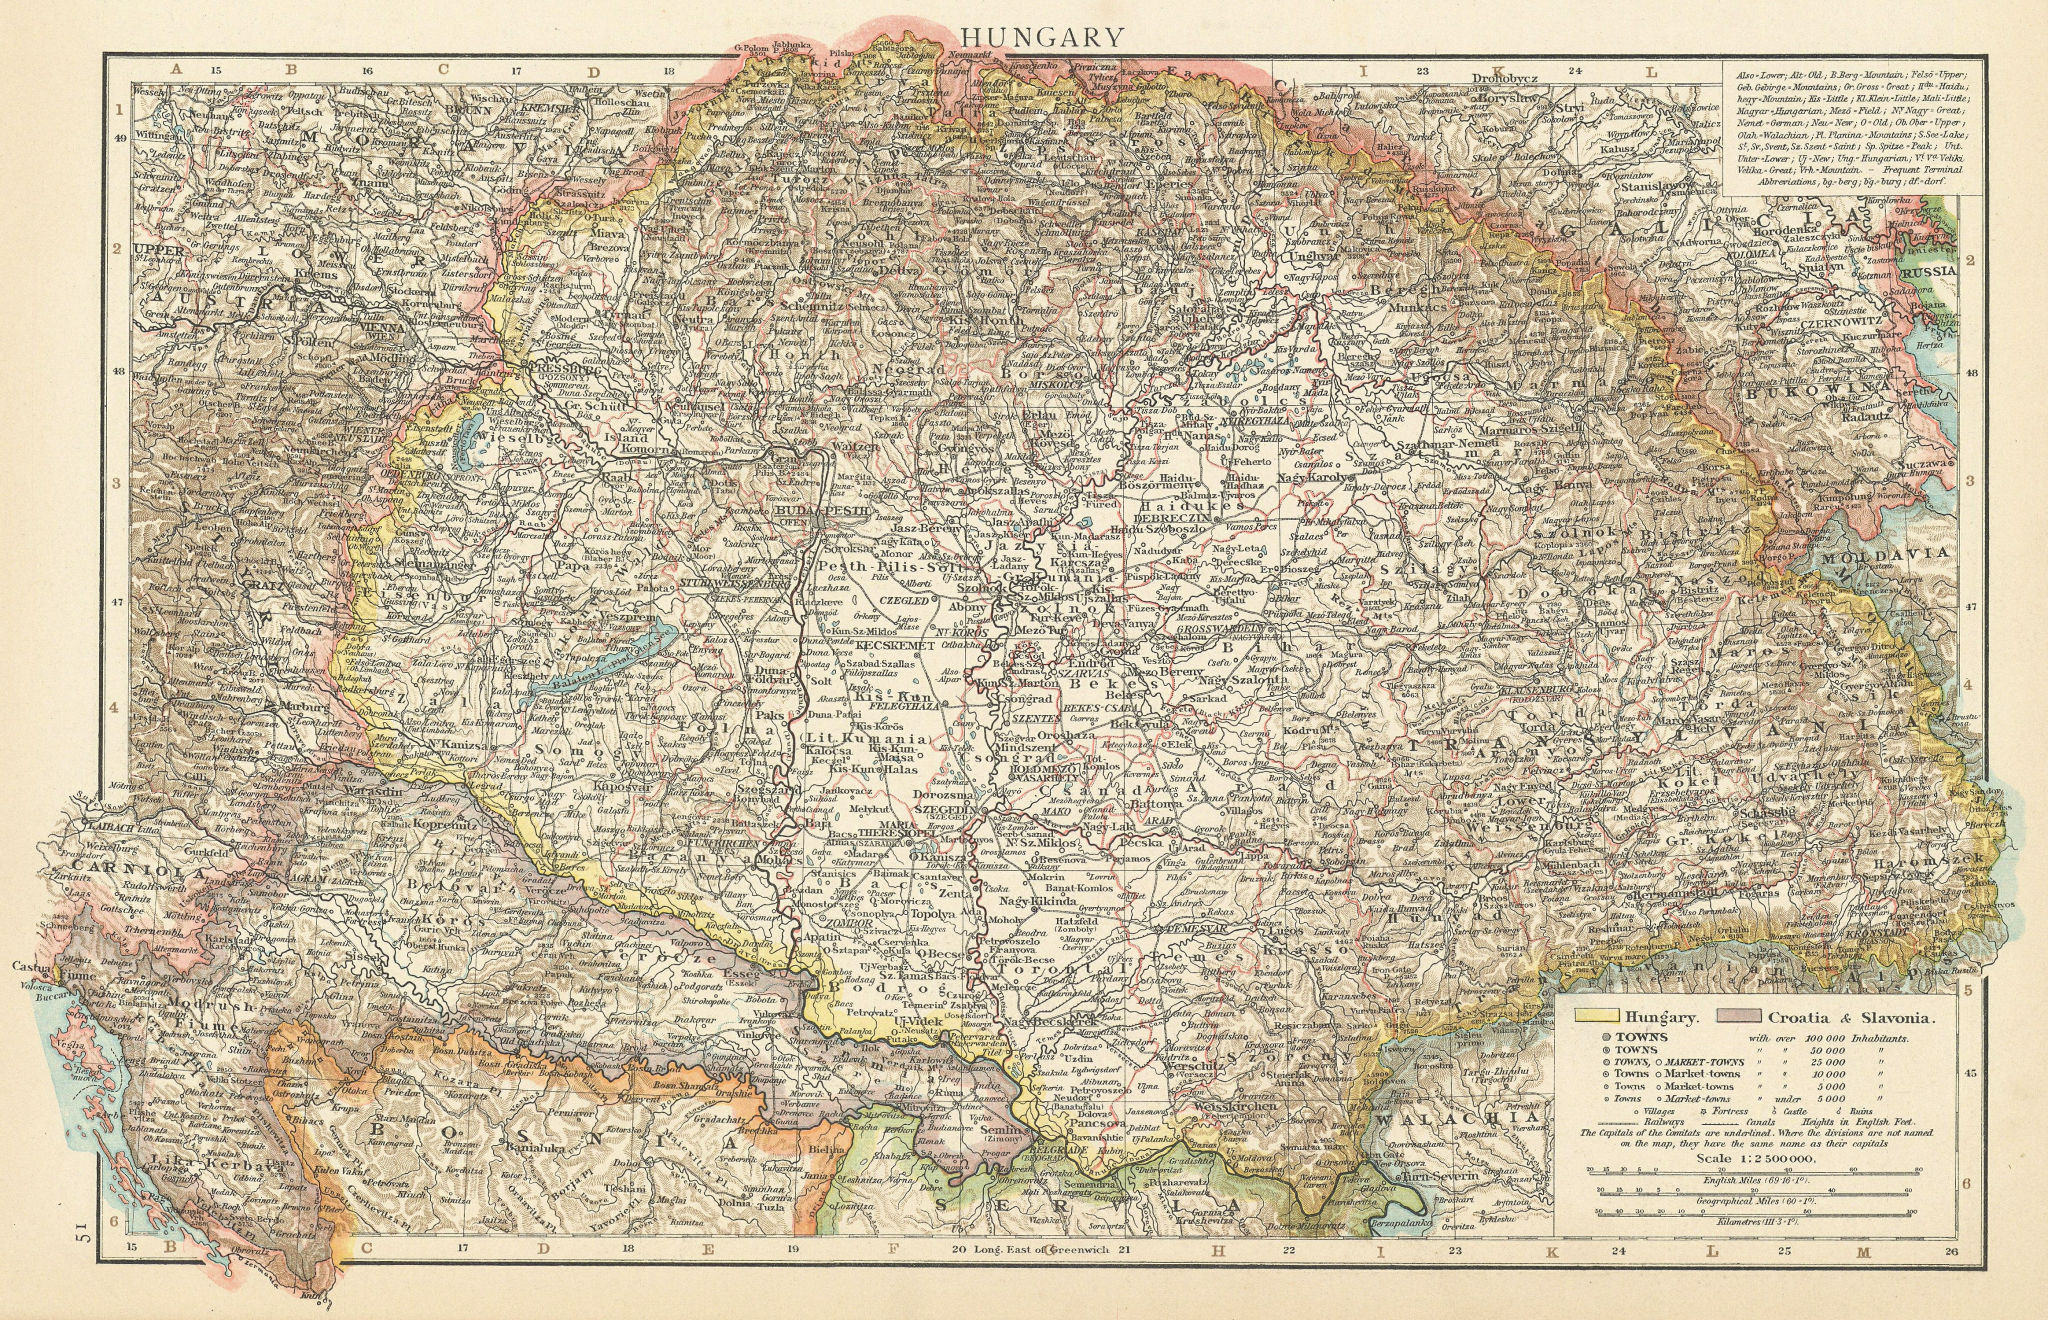 Associate Product Hungary, Croatia & Slavonia. Slovenia. THE TIMES 1895 old antique map chart